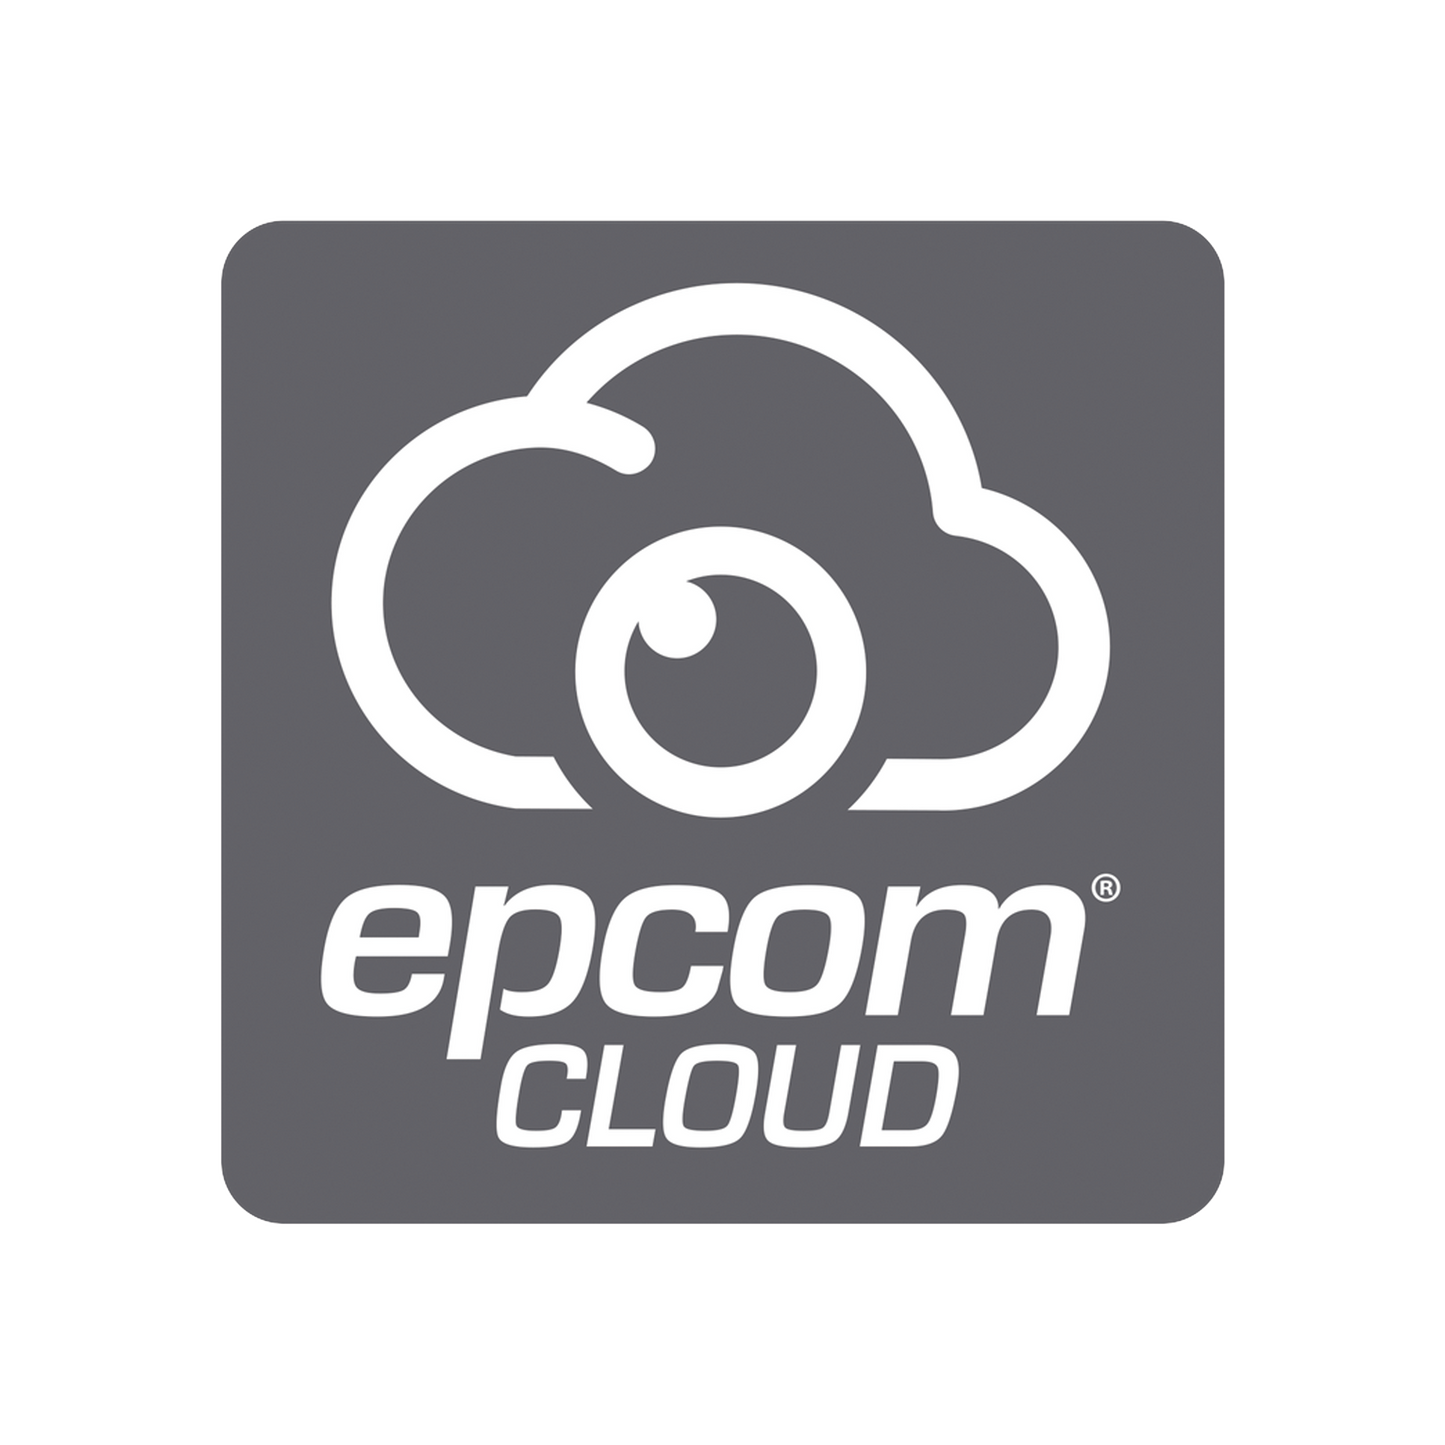 Epcom Cloud Annual Subscription / Cloud recording for 1 video channel at 8MP with 7 days retention / Continuous recording